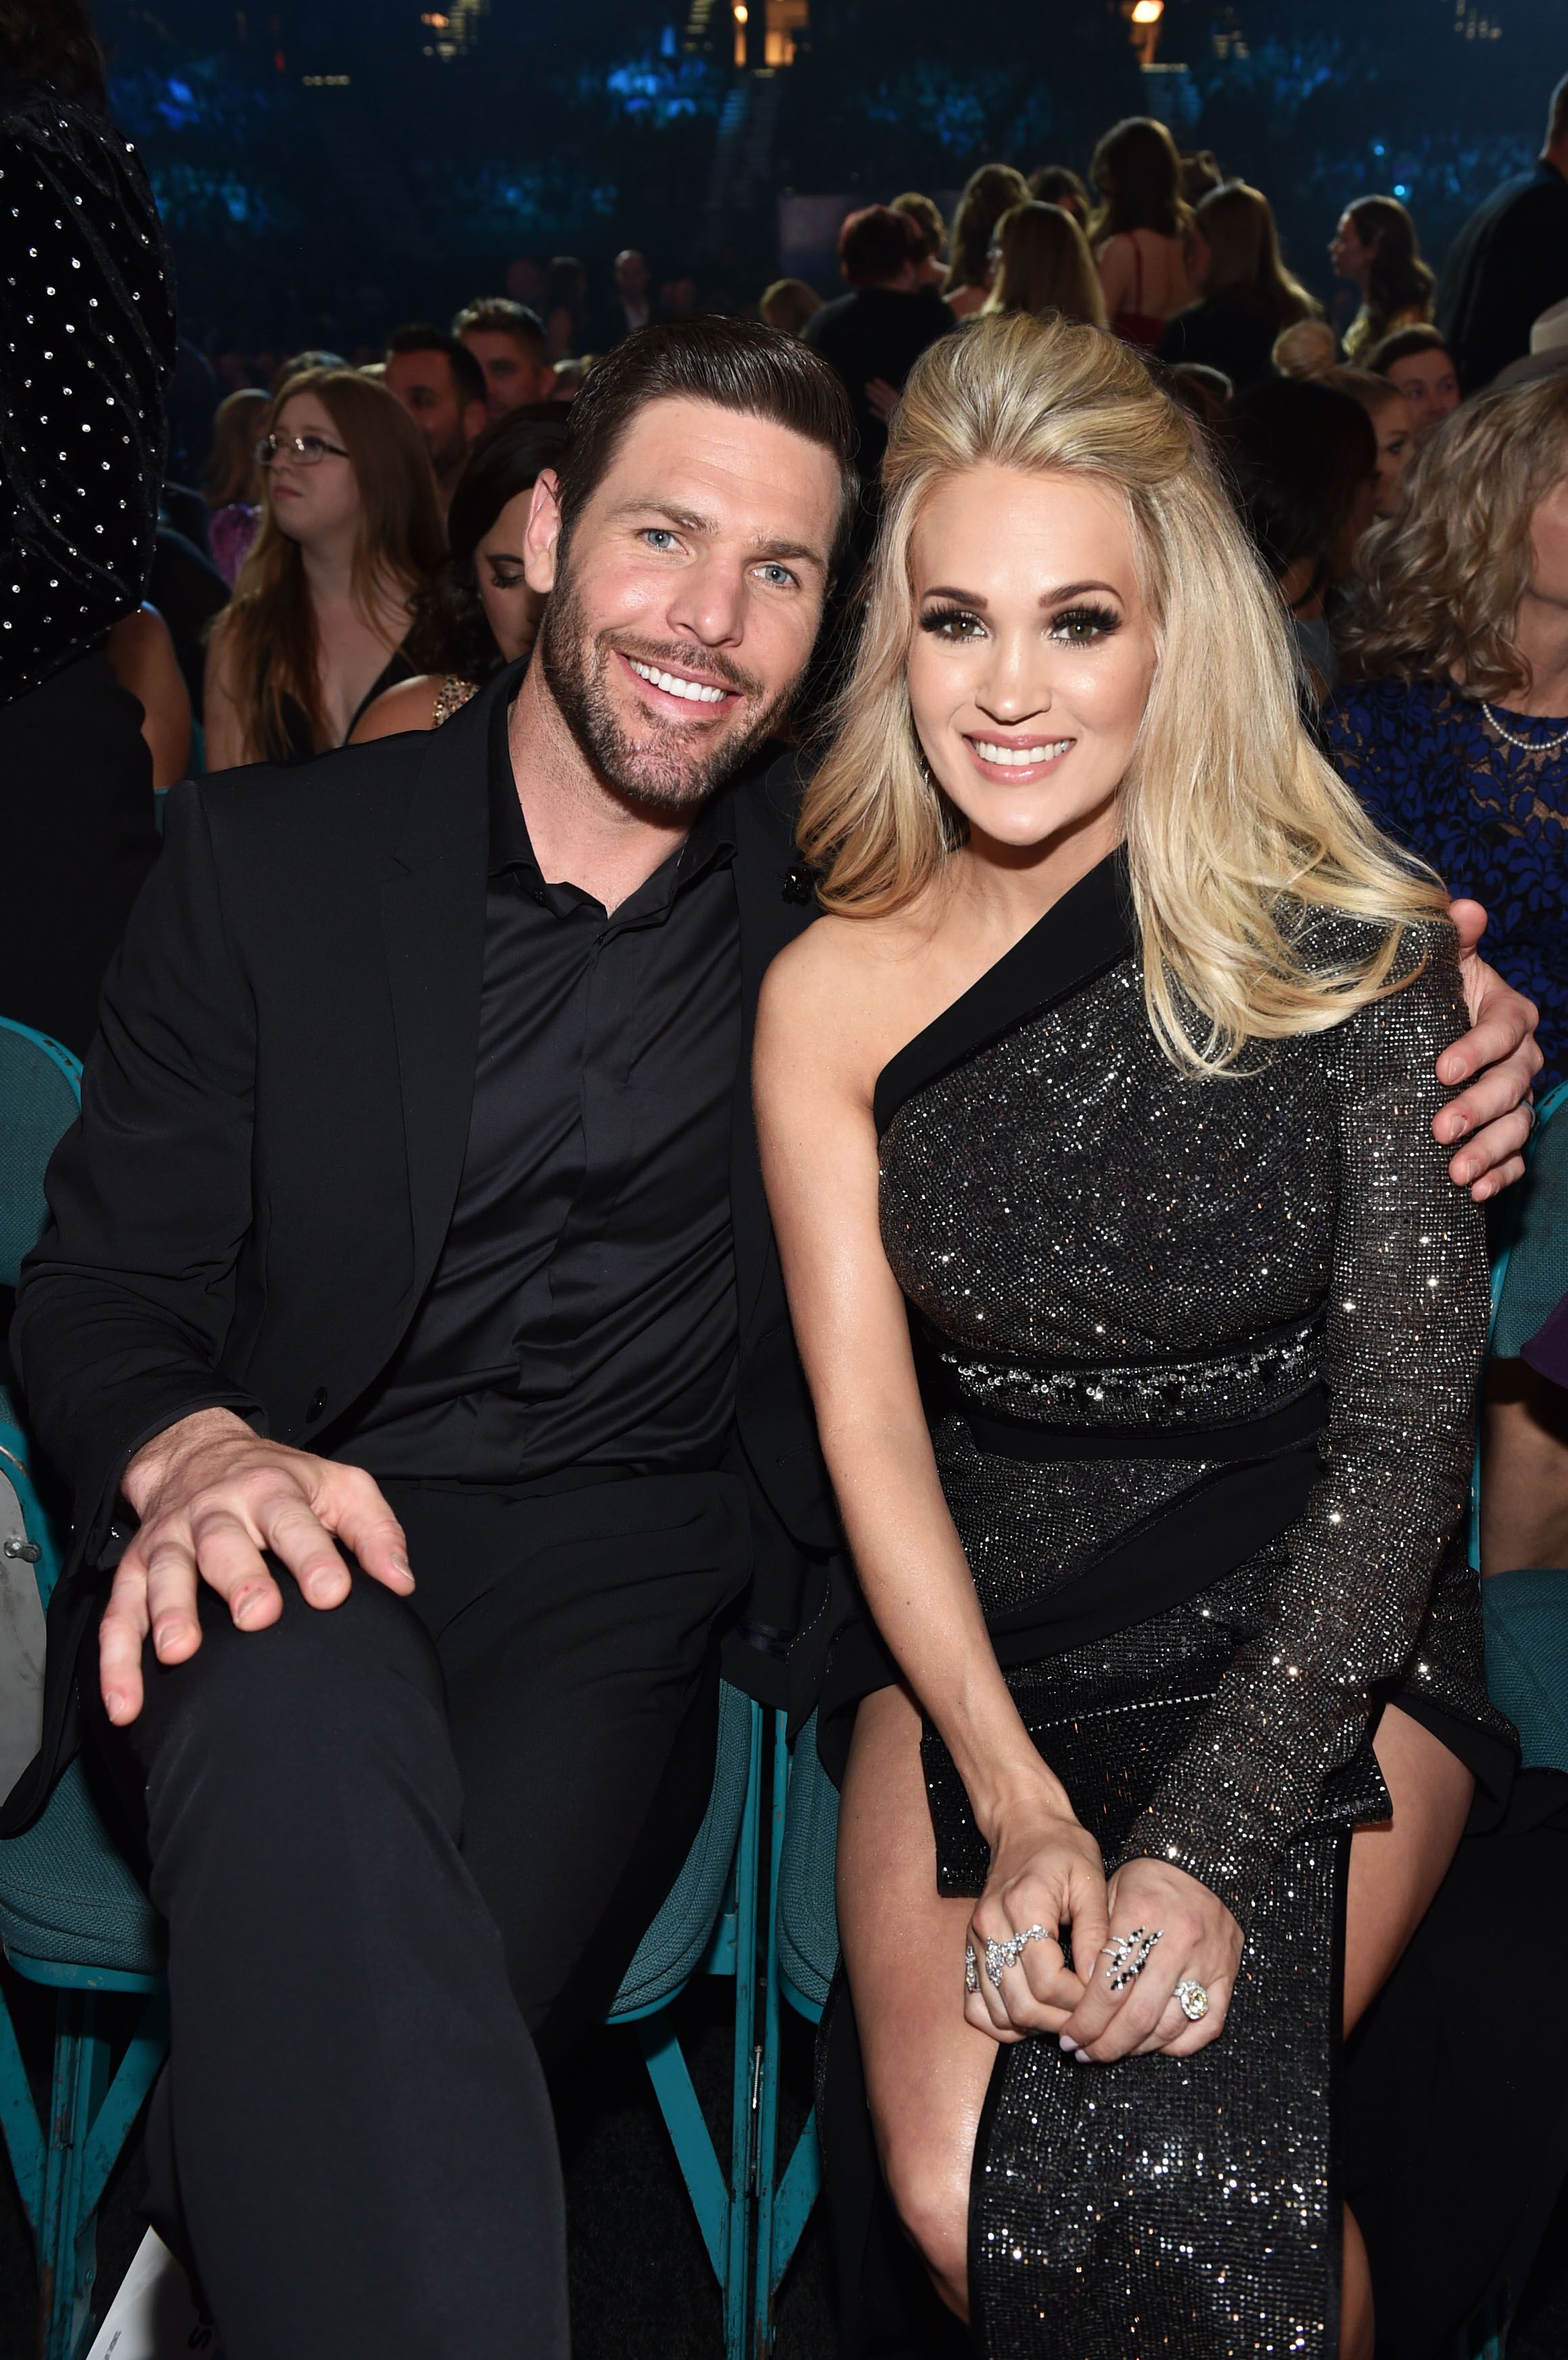 Carrie Underwood and Mike Fisher attend the Academy of Country Music Awards. | Source: Getty Images